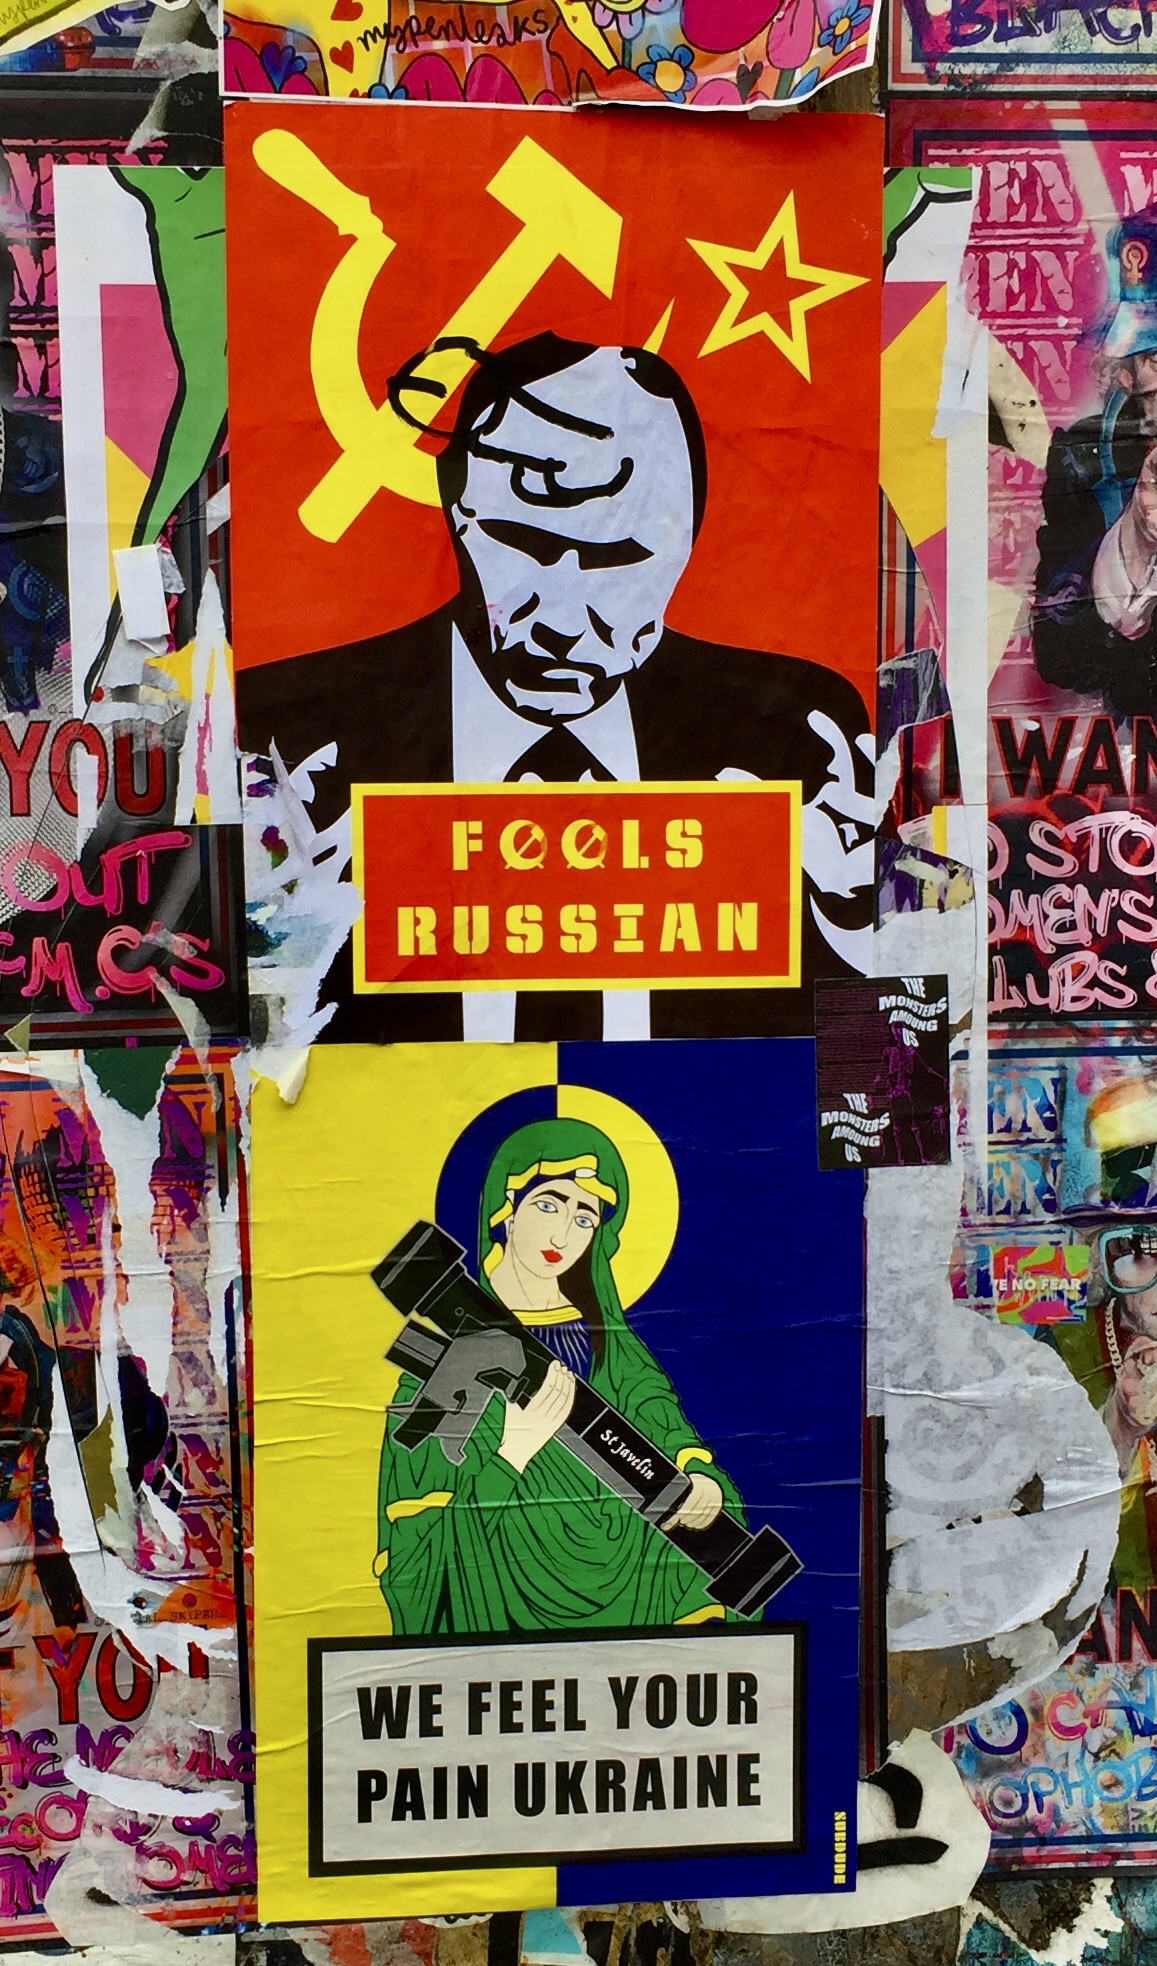 More Street art (particularly work supporting Ukraine).